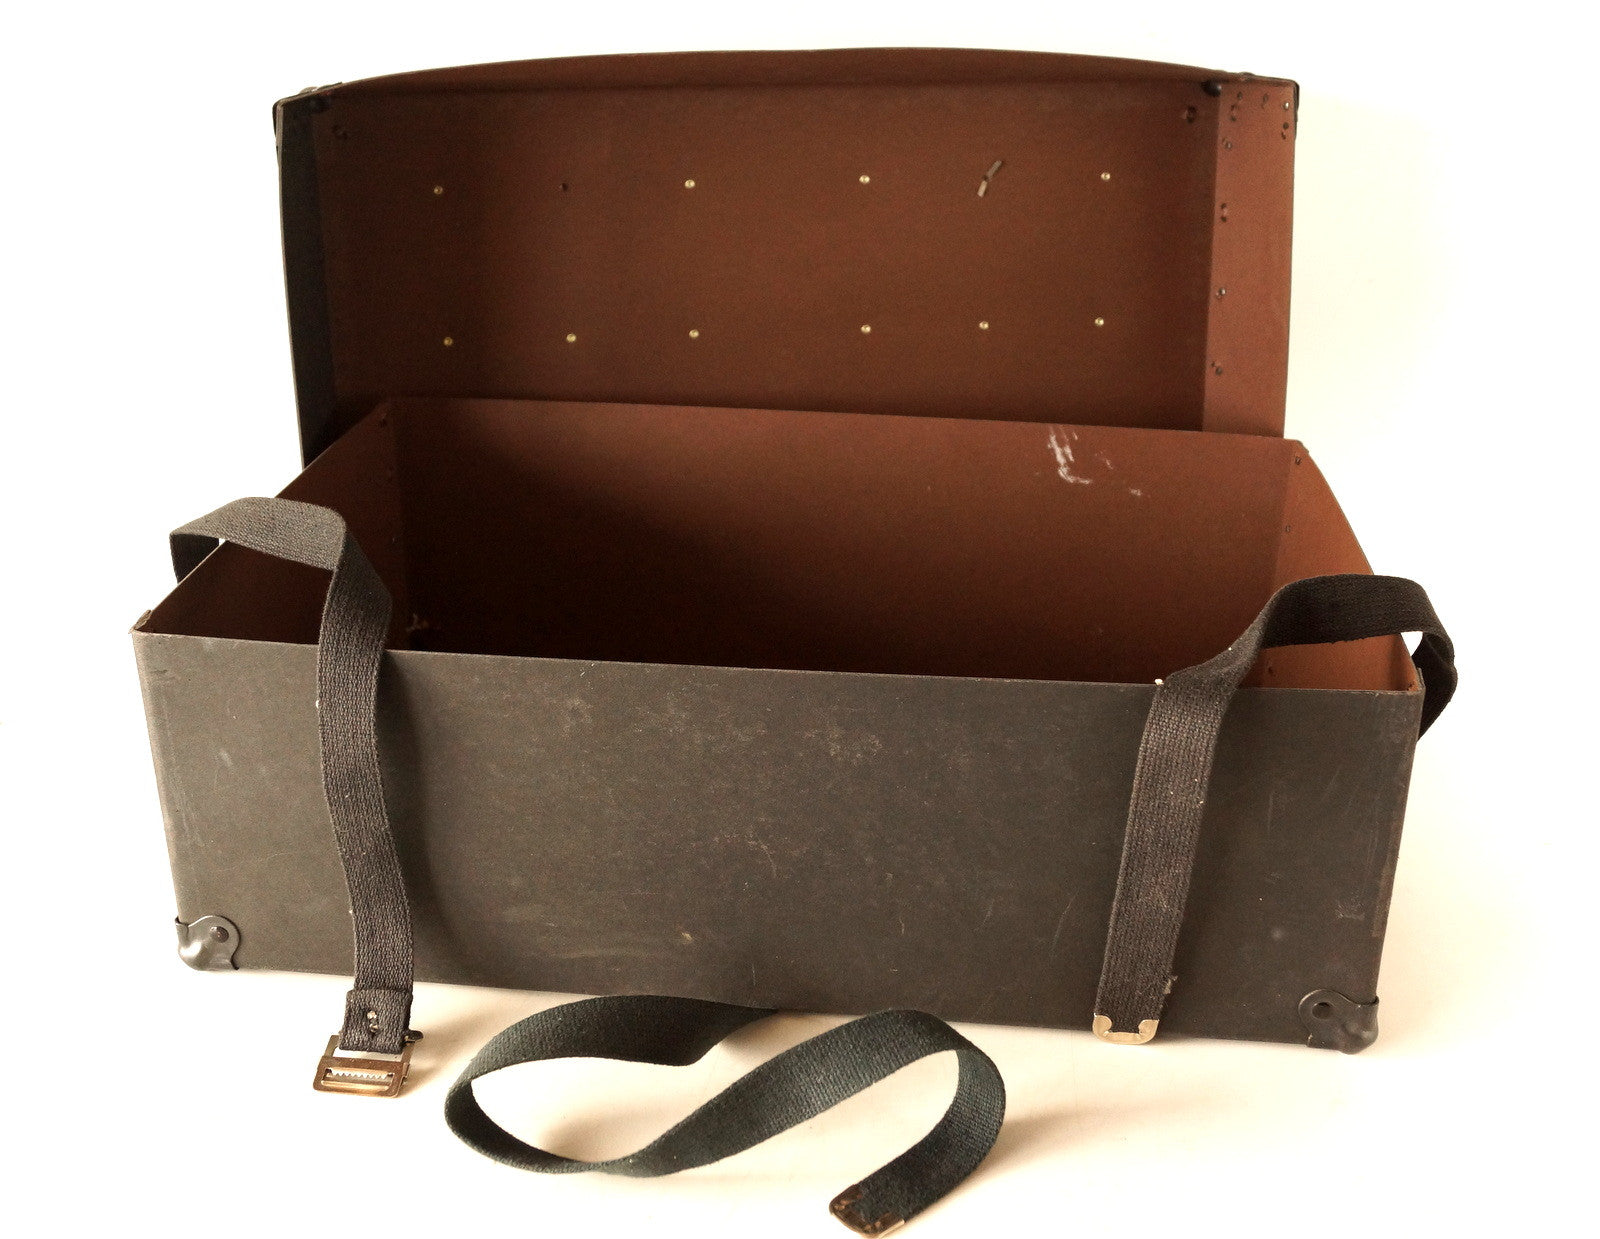 Vintage Black Shipping Box with Canvas Straps (c.1940s